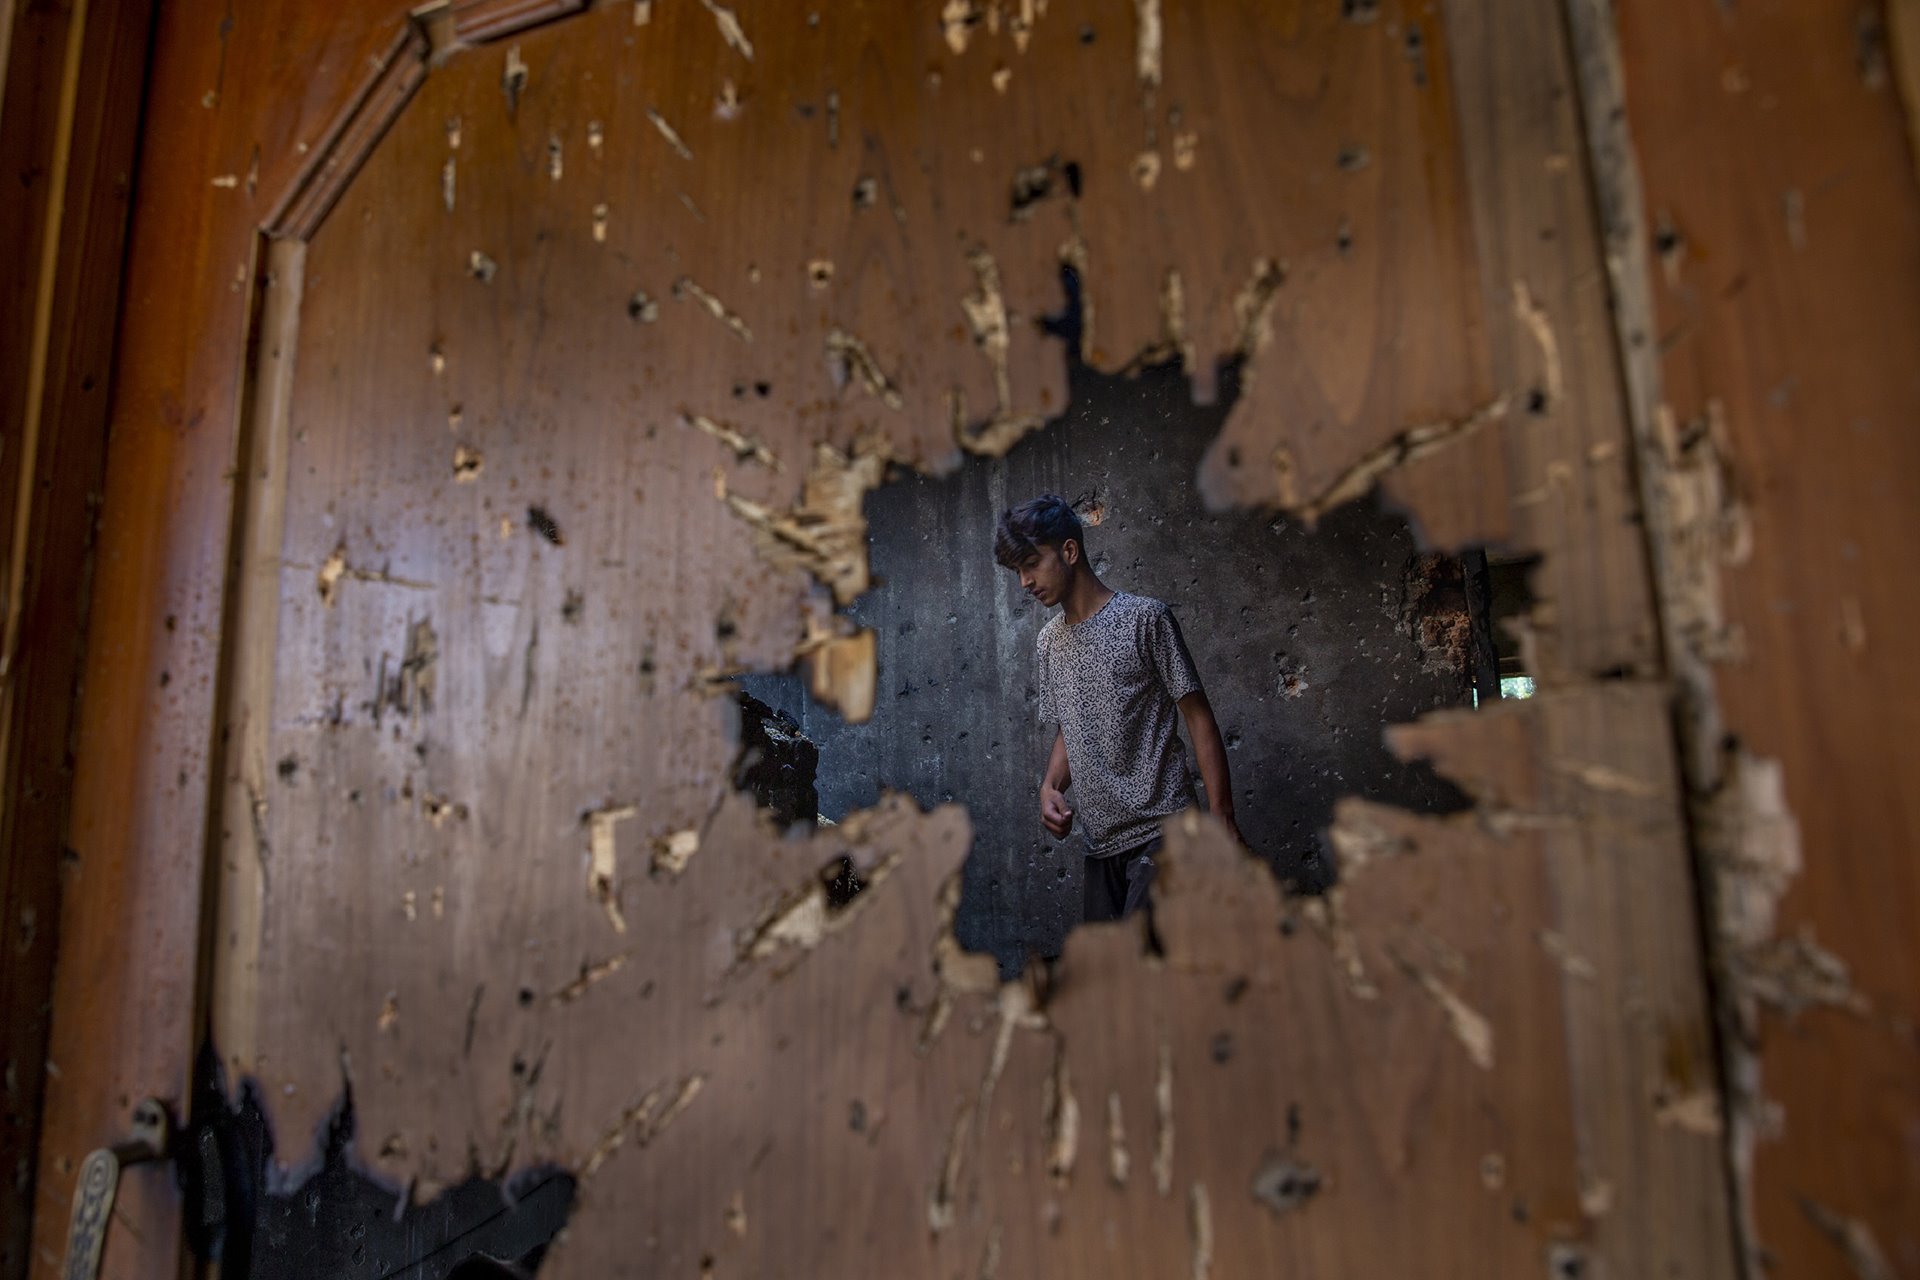 A man inspecting a house where suspected Kashmiri militants had taken refuge, is seen through a hole created by a mortar shell fired by government forces during a gunfight, in Srinagar, Indian-administered Kashmir. Officials said two suspected militants were killed in the gunfight.